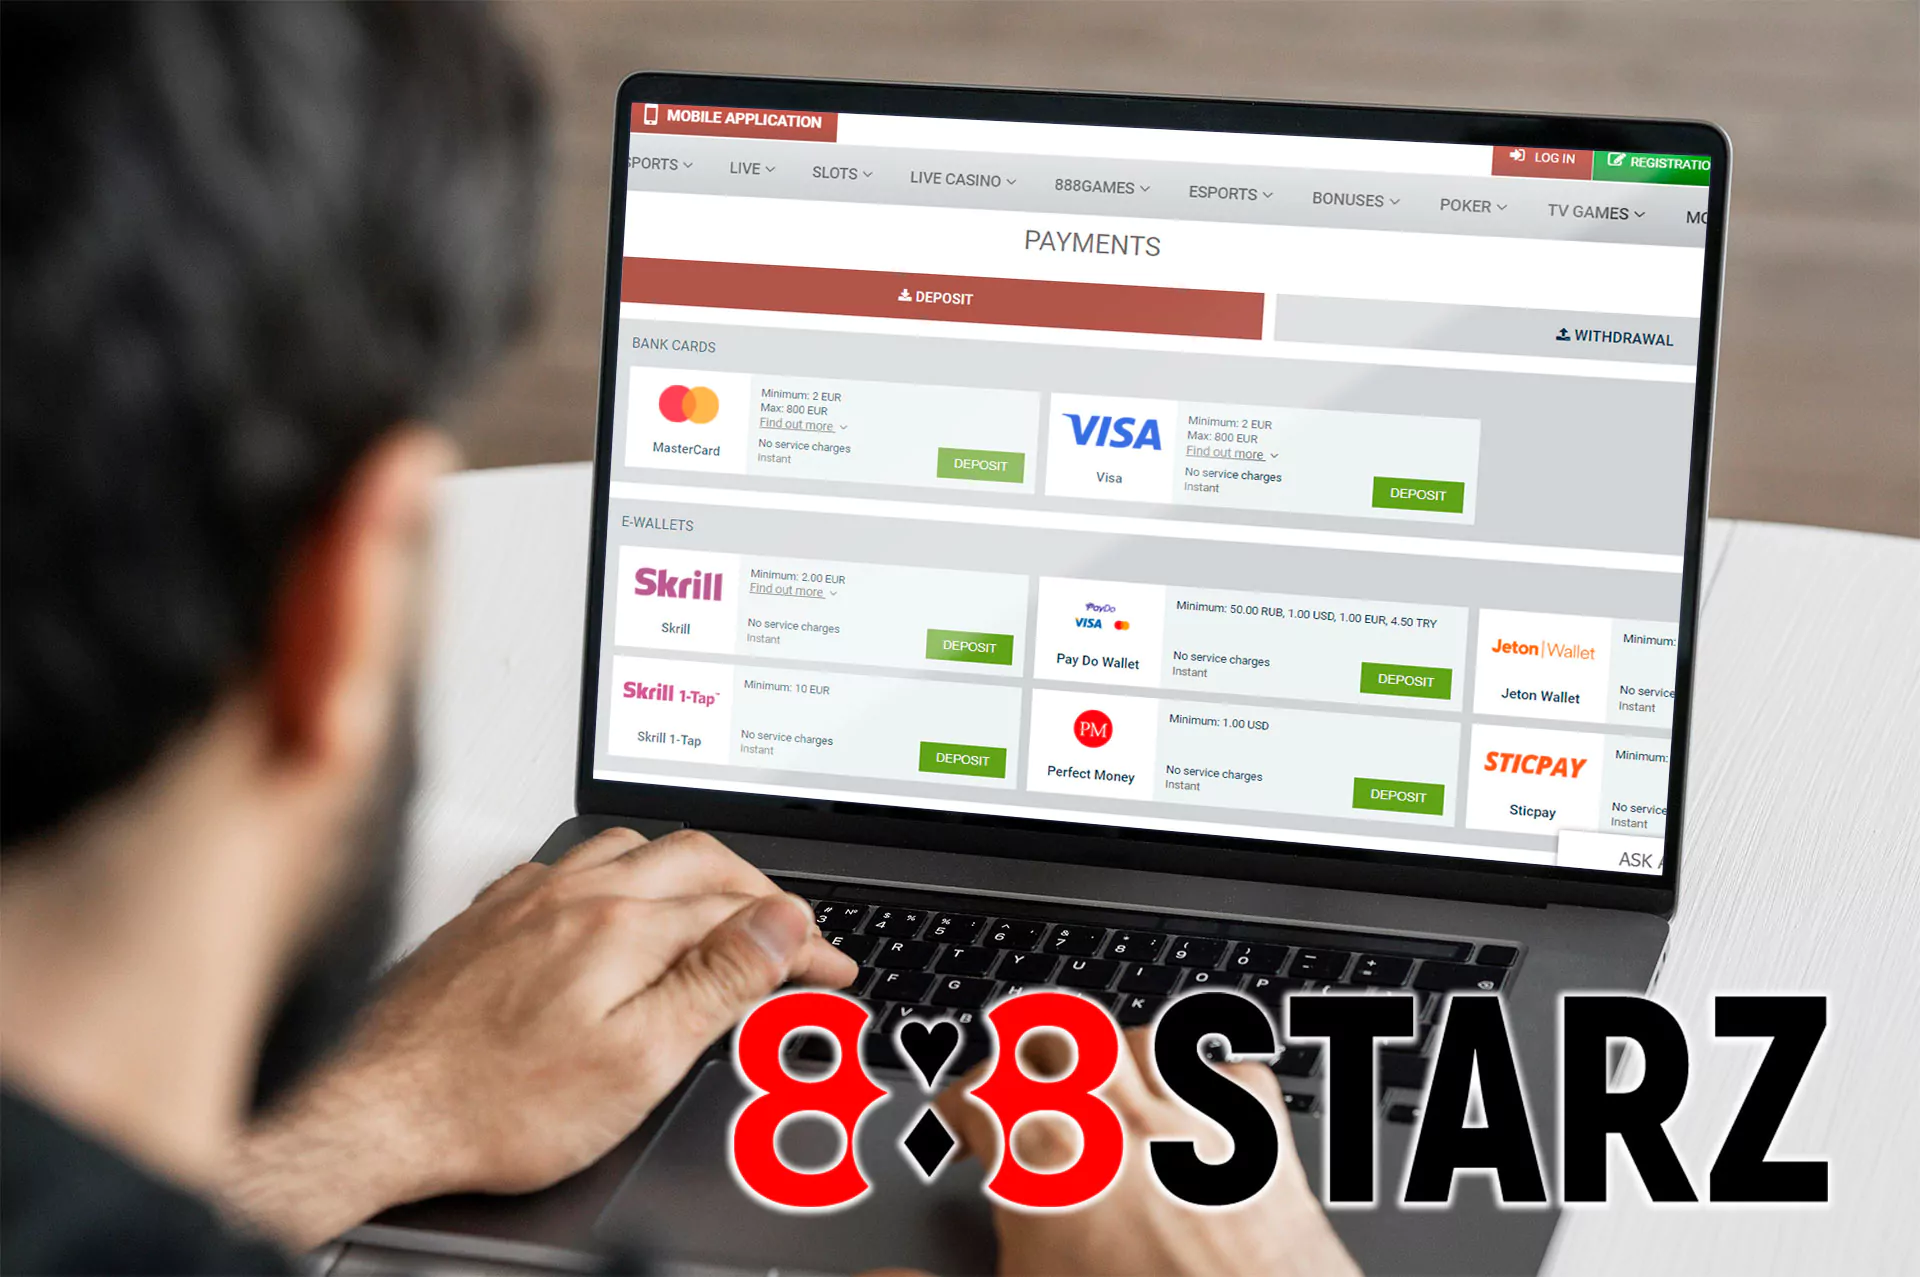 Top up your 888starz account.